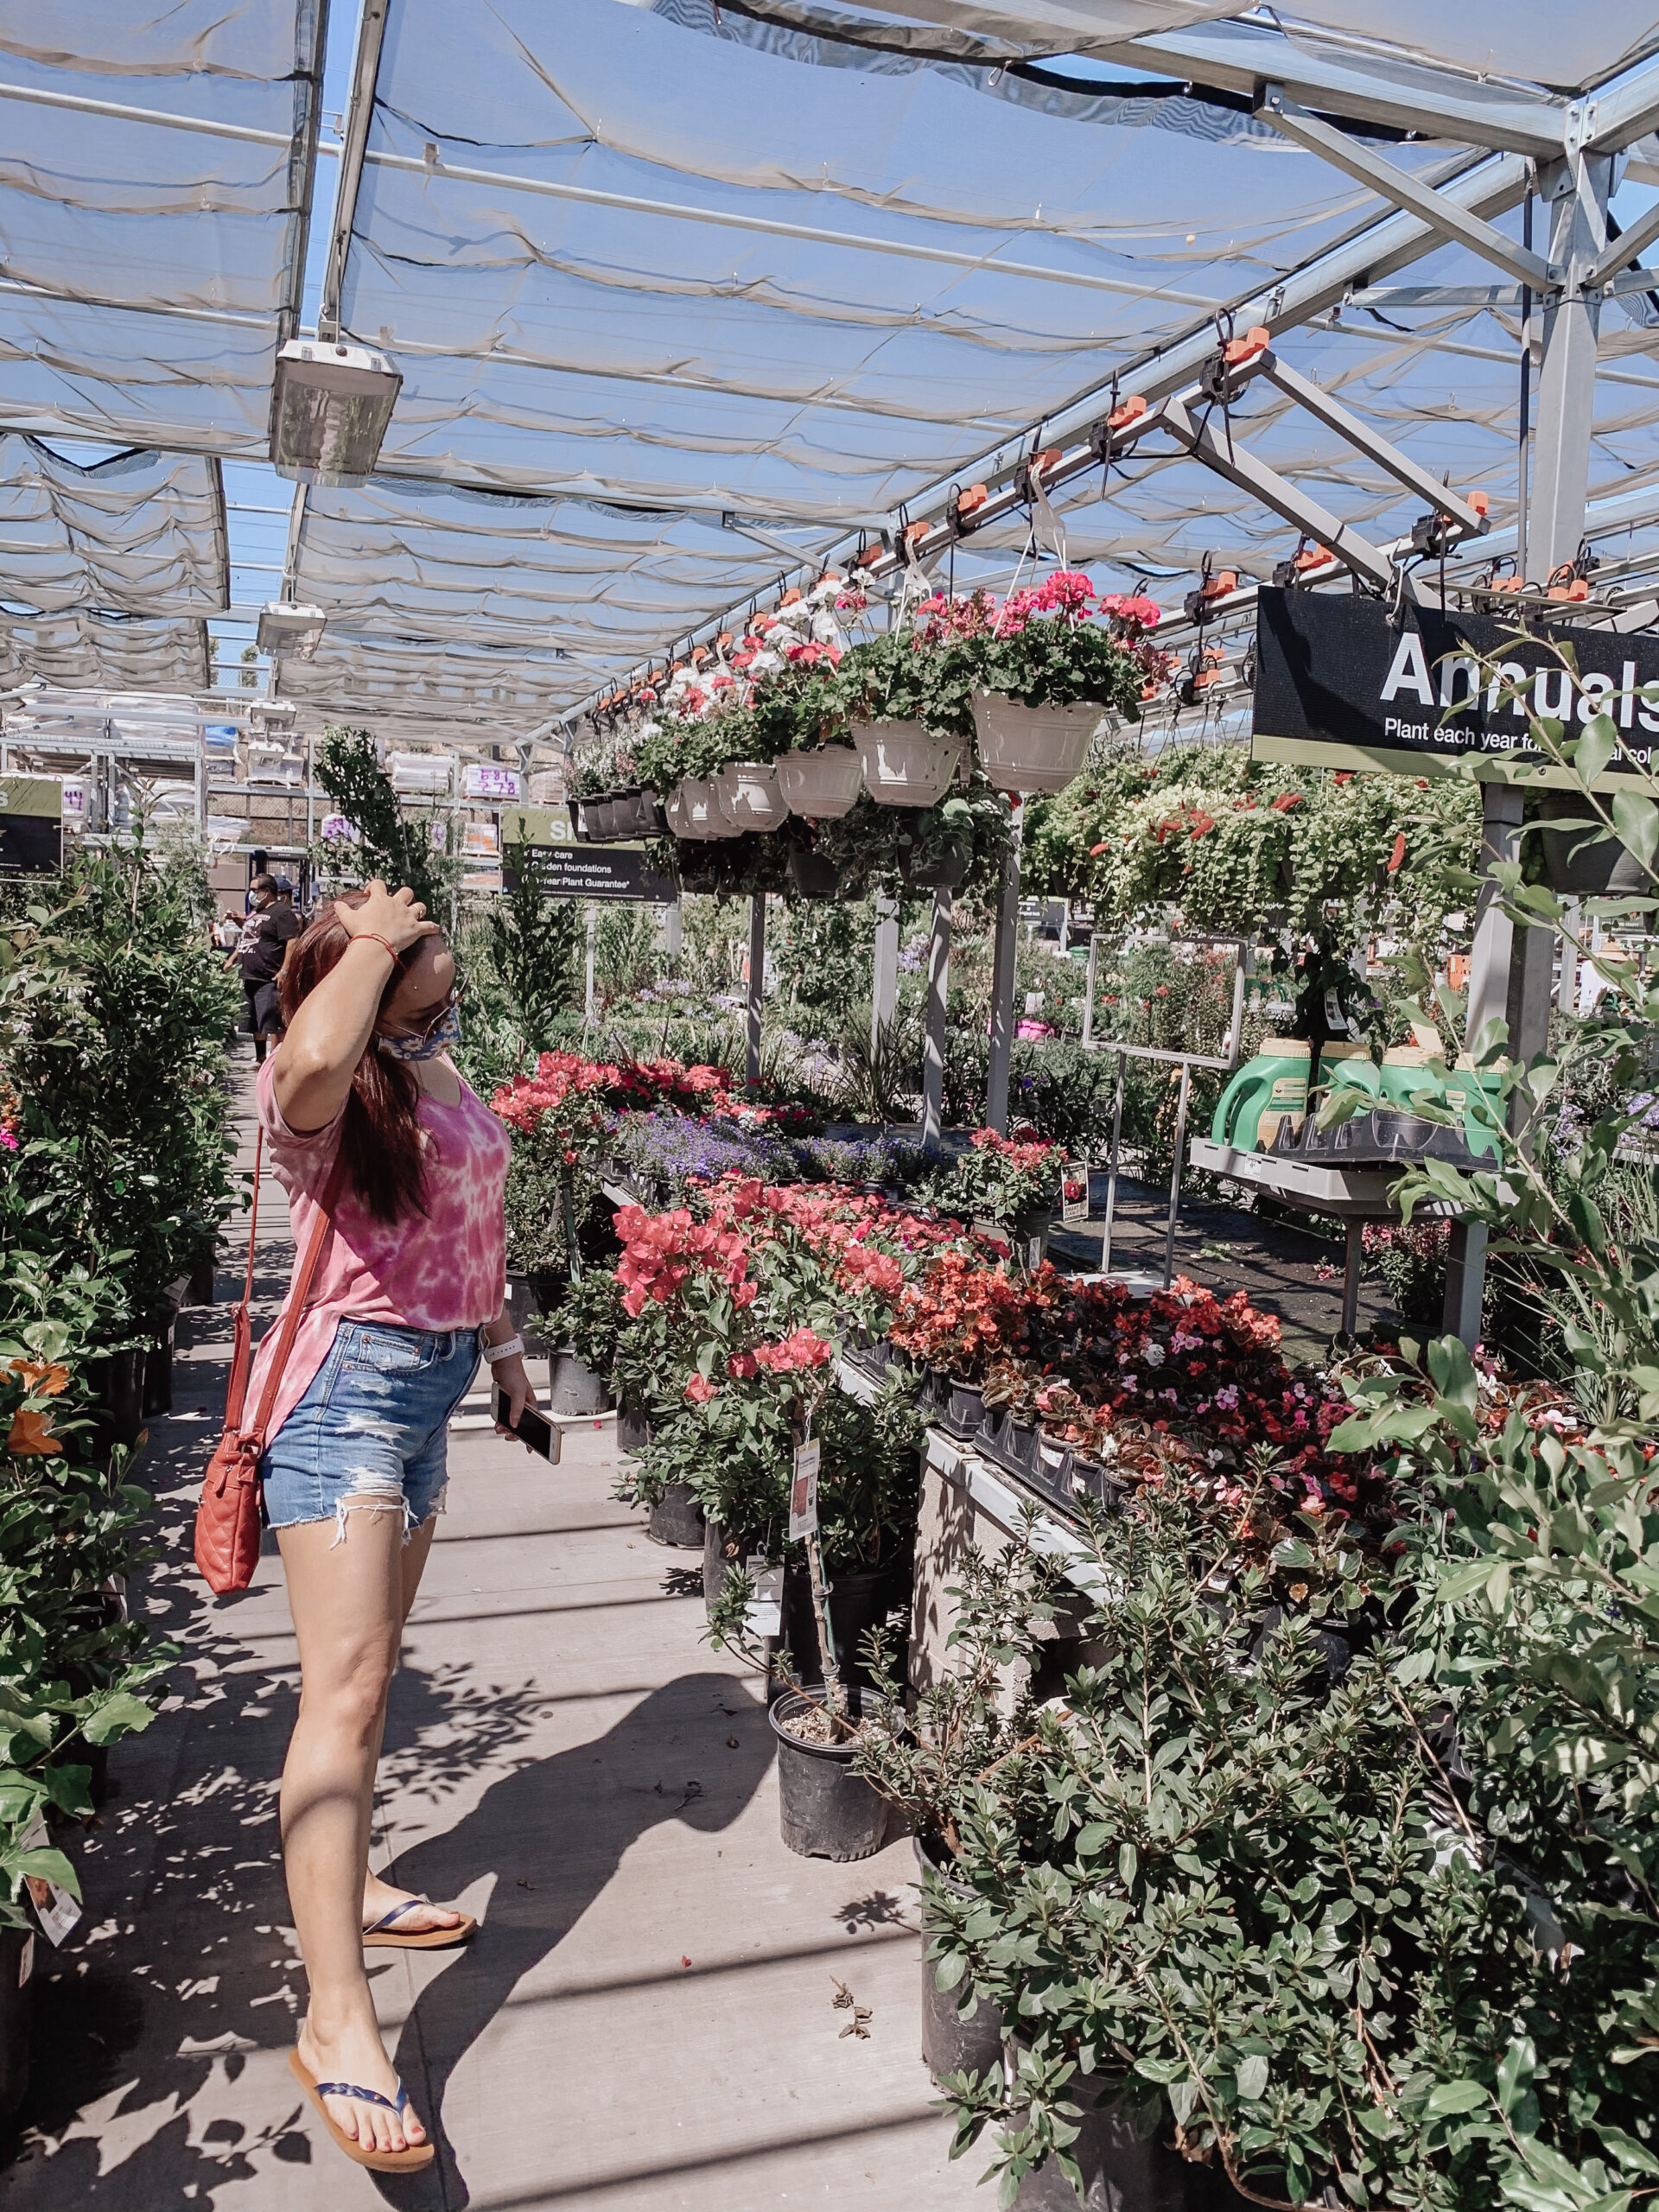 pslilyboutique-on-instagram-home-depot-flowers-plants-garden-center-stone-mountain-red-bag-la-fashion-blogger-streetstyle-summer-2020-outfit-ideas-IMG_1680